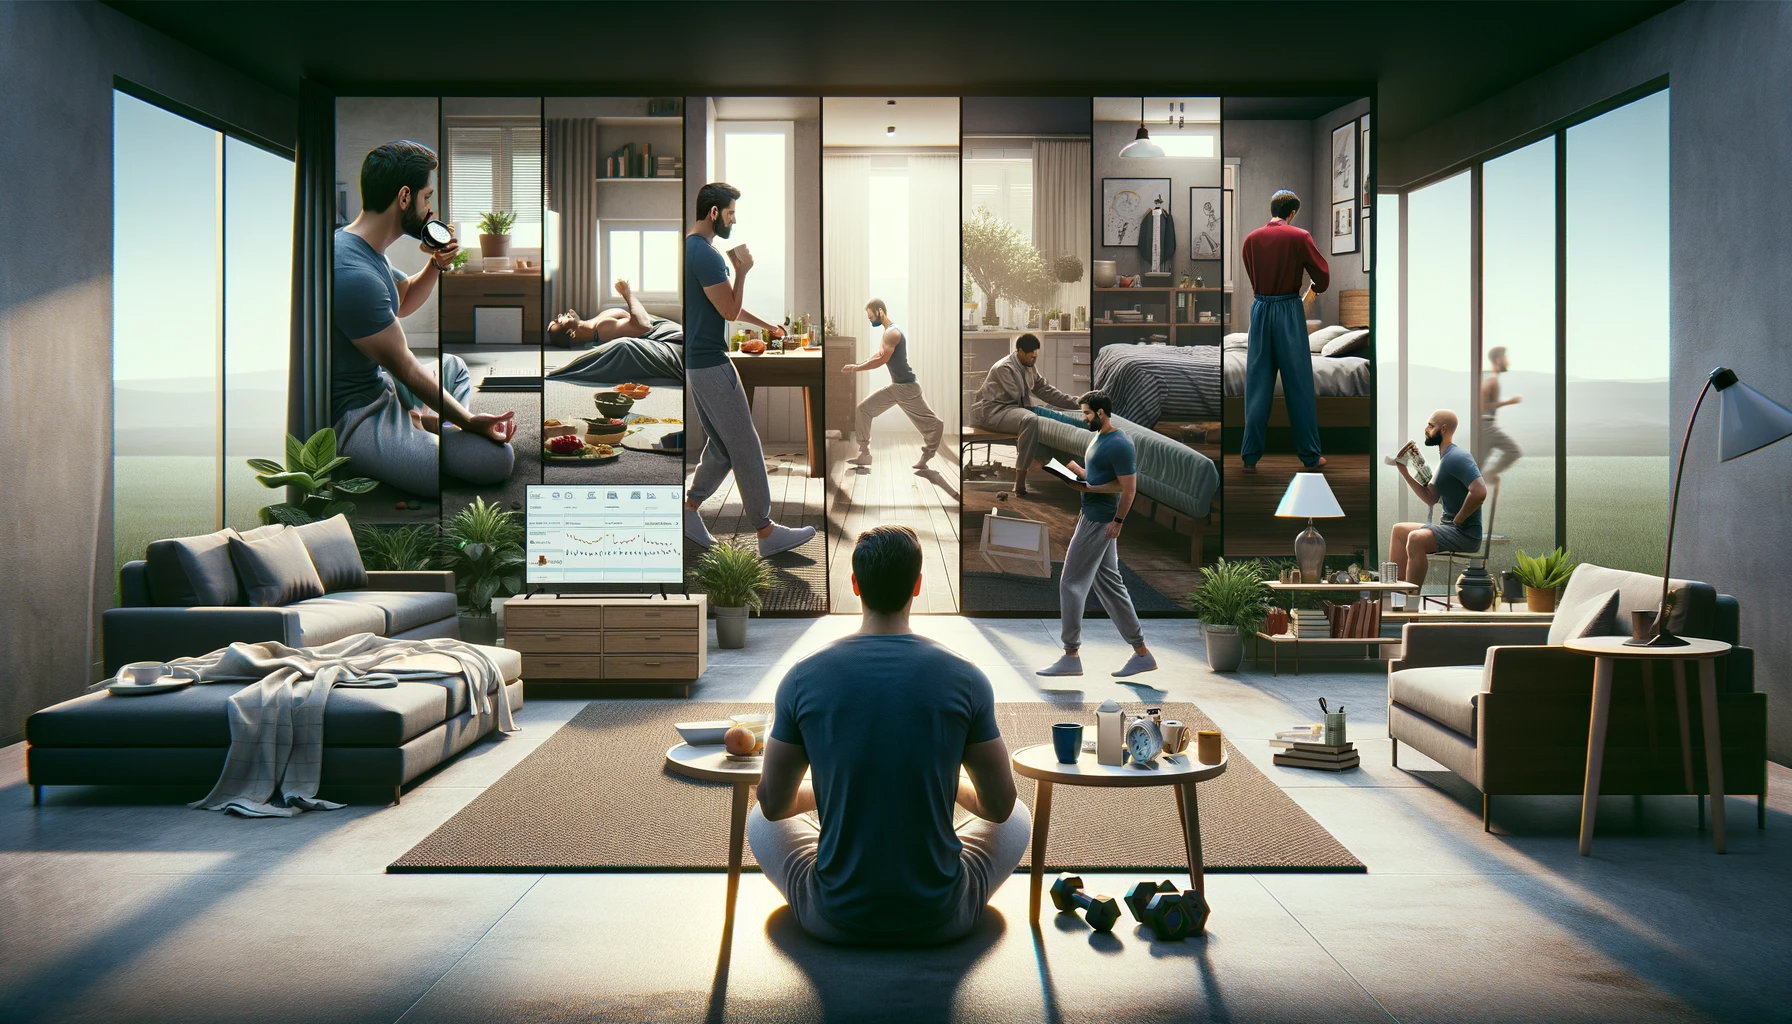 A cinematic image capturing the essence of the Best Morning Routine For Men